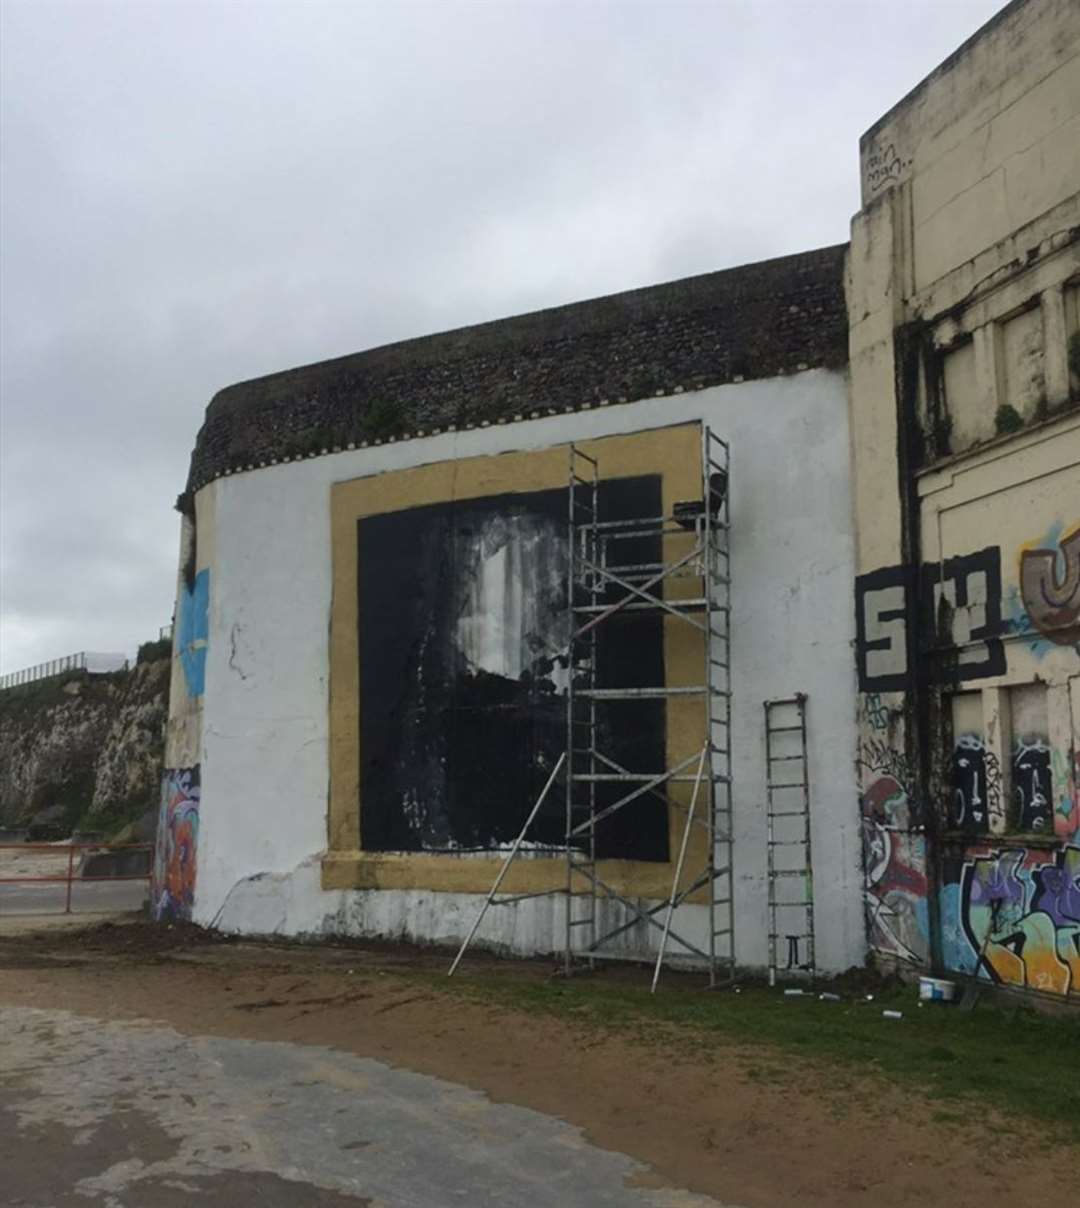 The Sir David Attenborough mural has been painted on a wall near Margate lido. Picture: @pad303